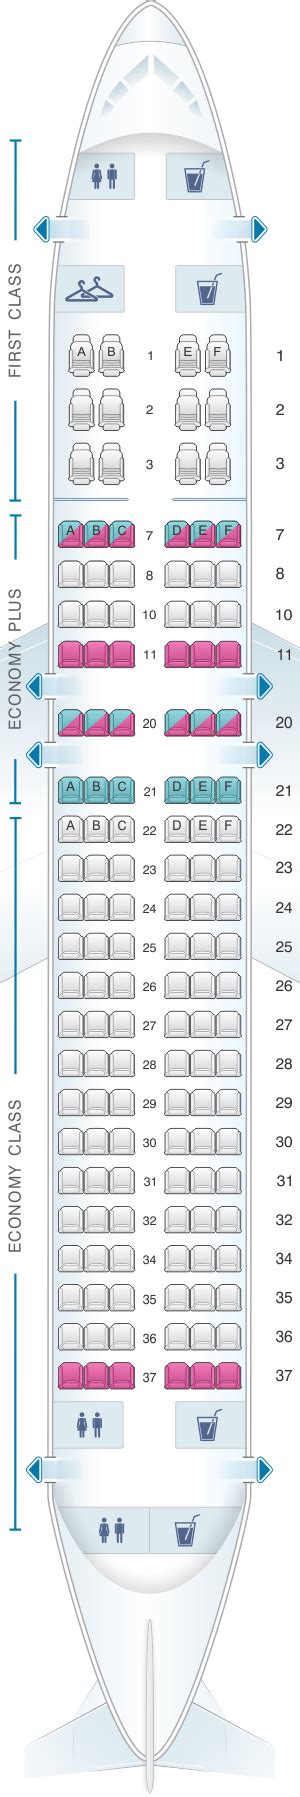 United Airbus A320 Seat Map